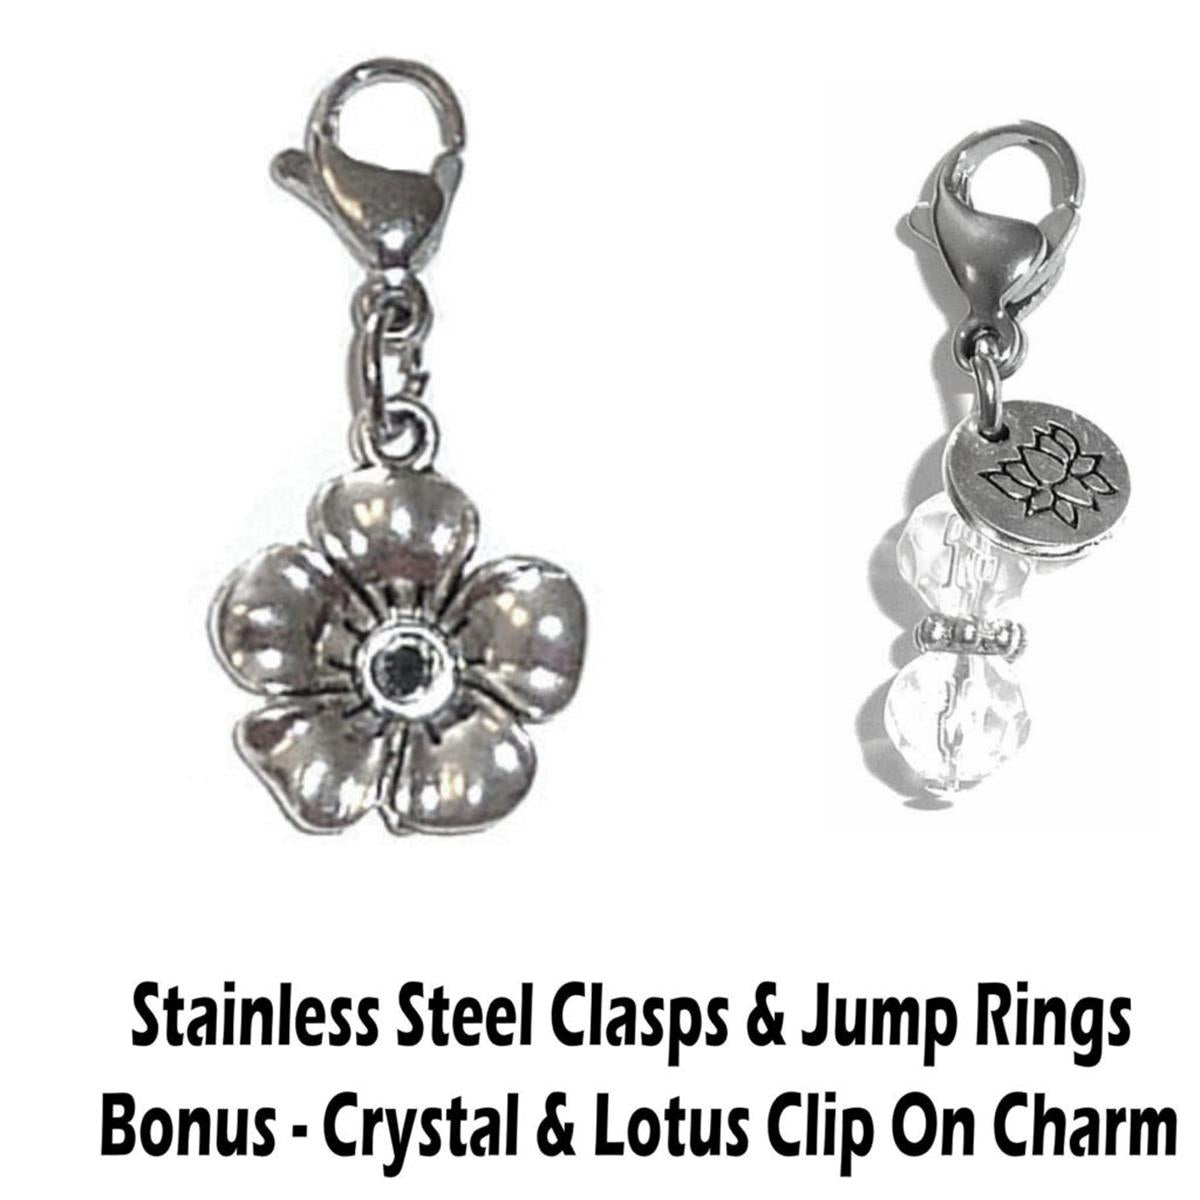 Flower Blossom Clip On Charms - Whimsical Charms Clip On Anywhere